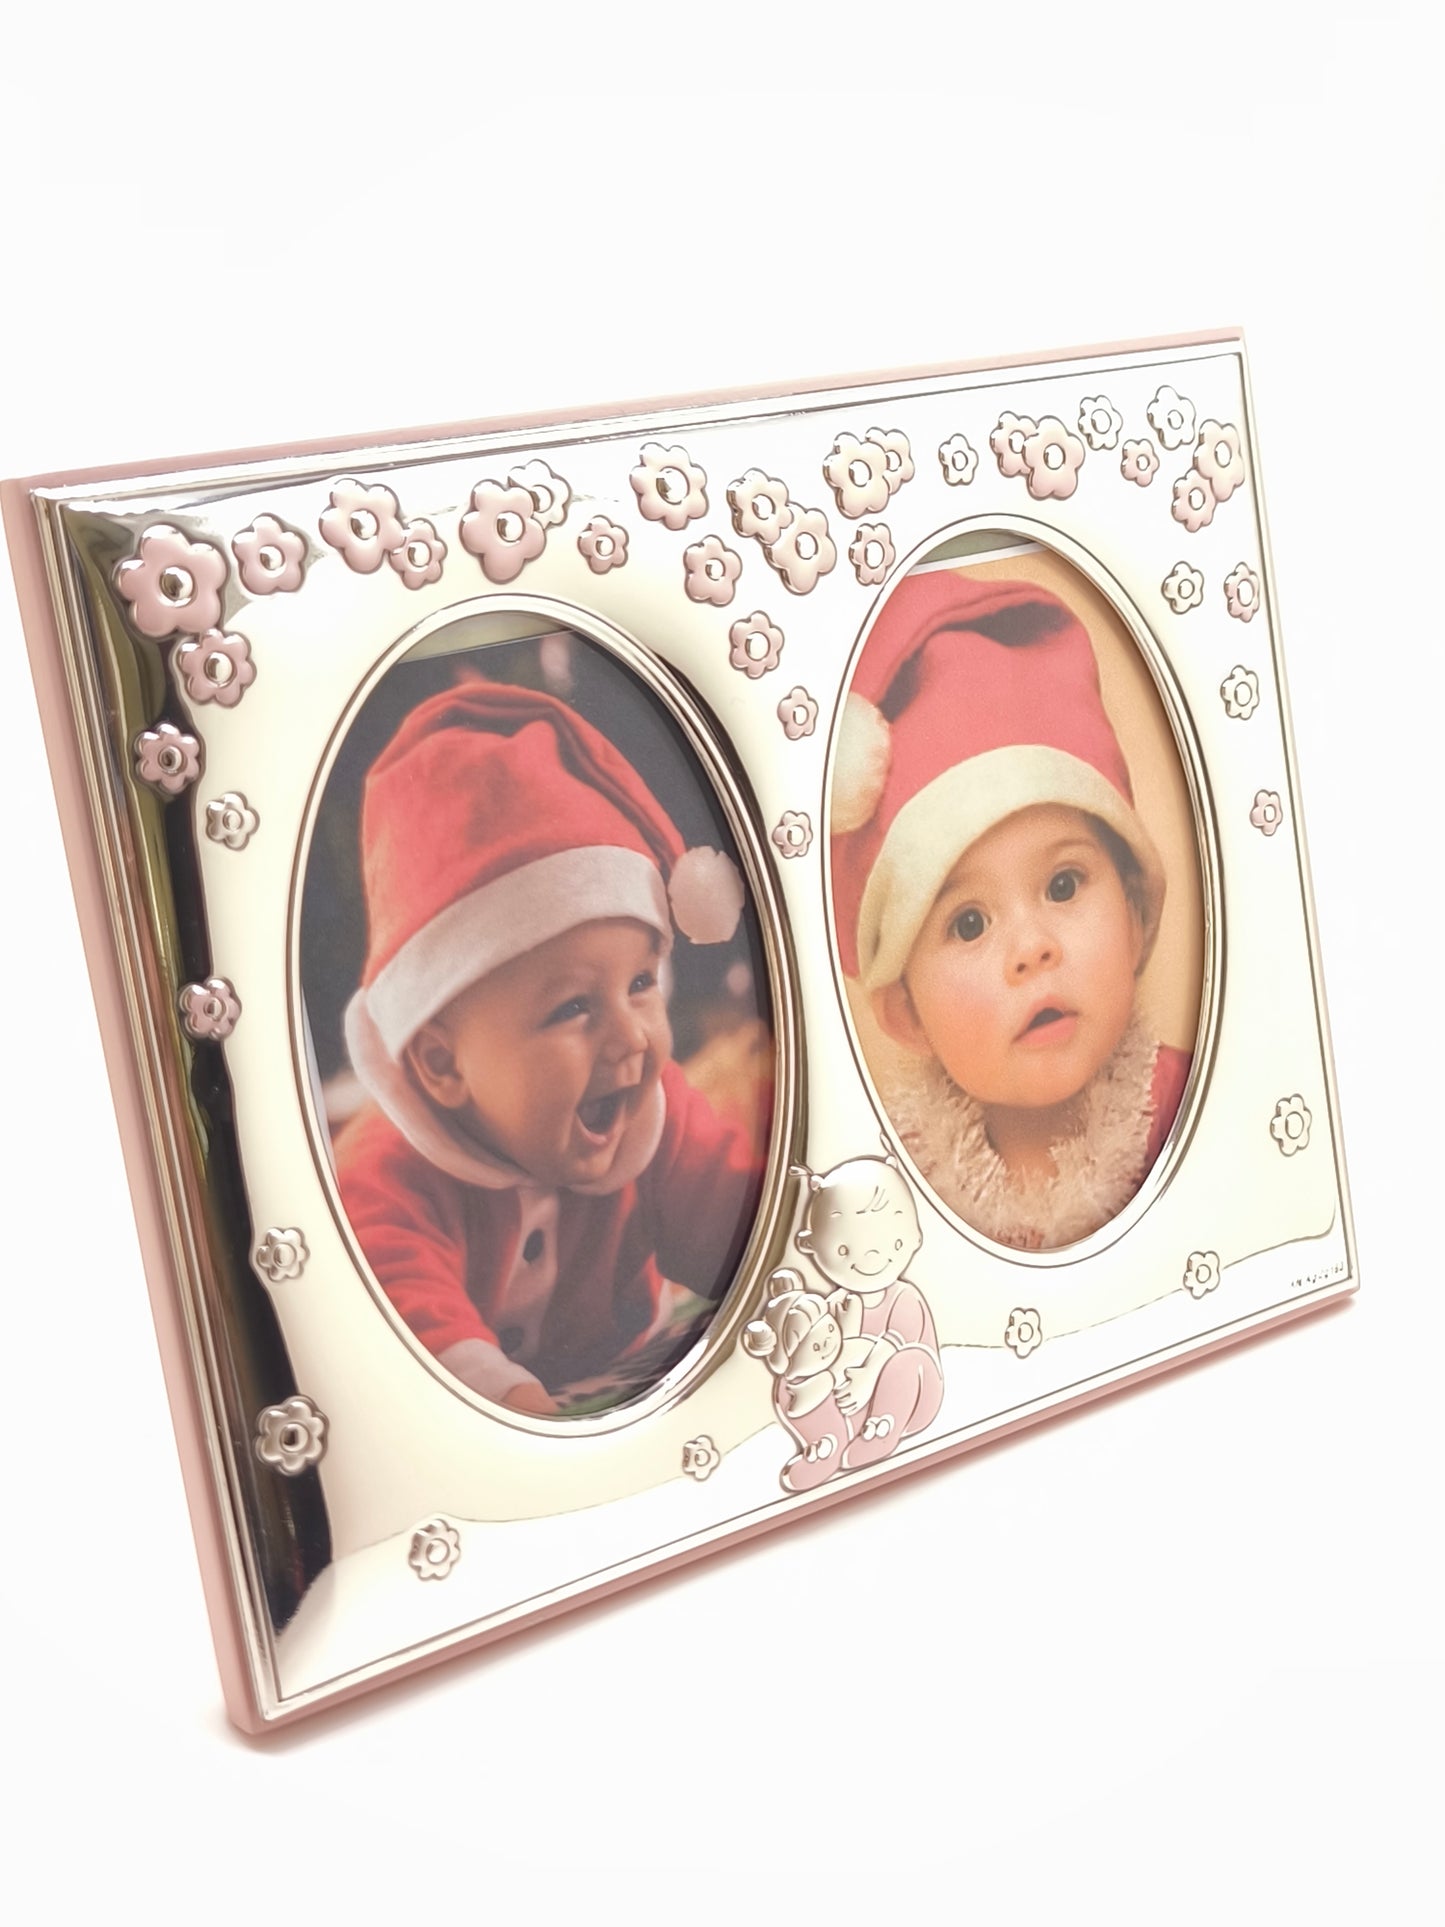 Double photo frame for girls 7x10